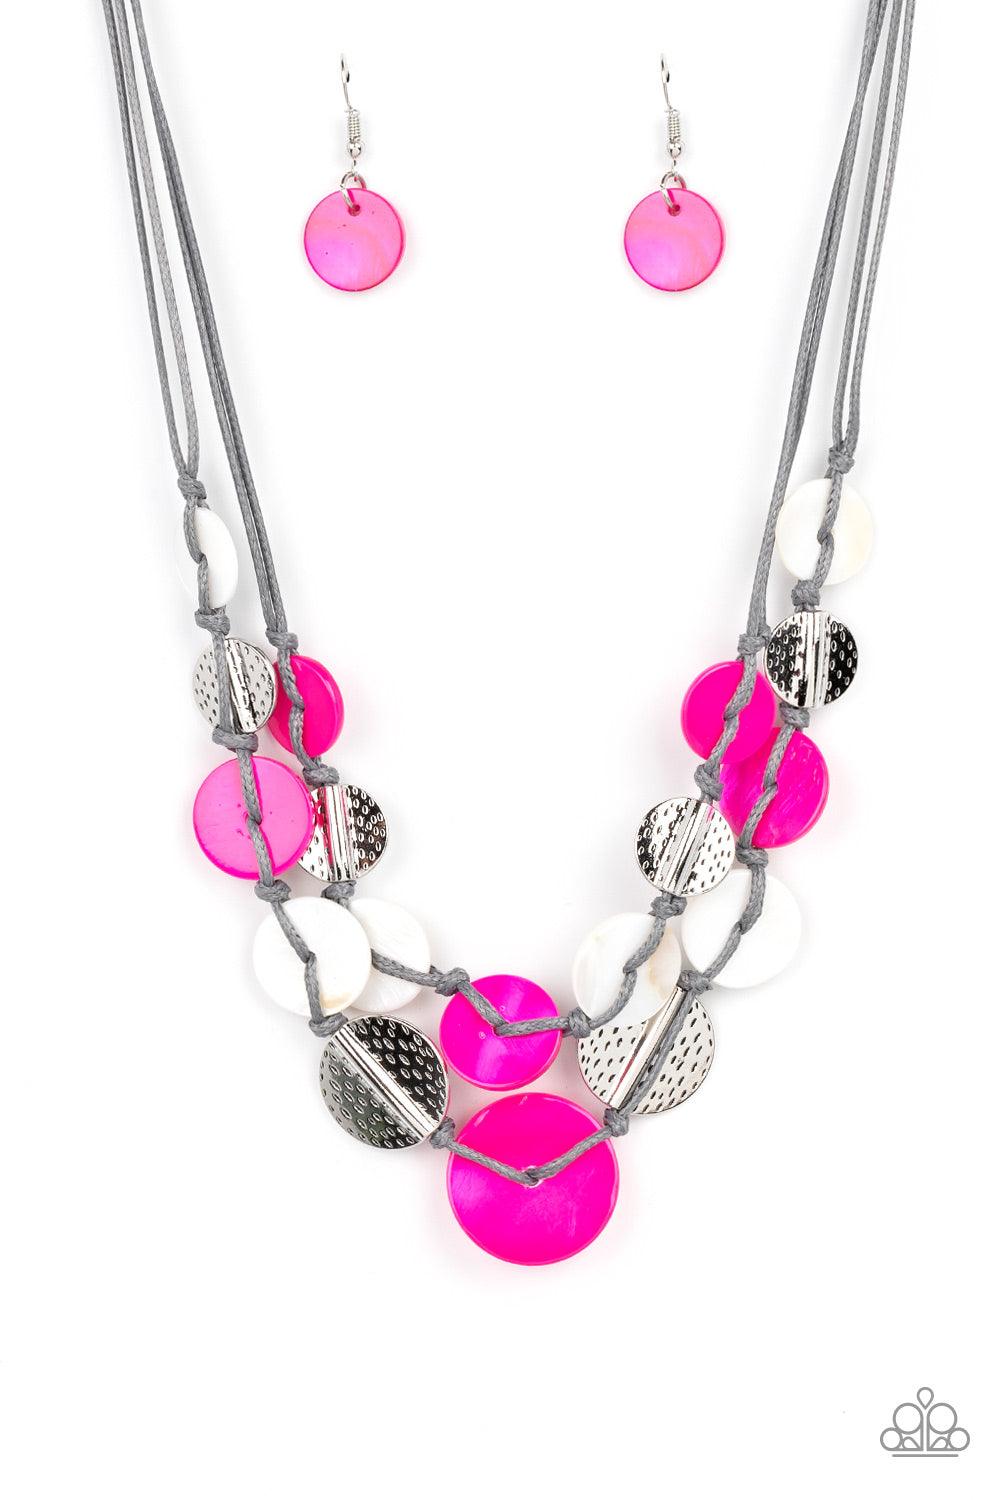 Paparazzi Accessories - Barefoot Beaches - Pink Necklace - Bling by JessieK